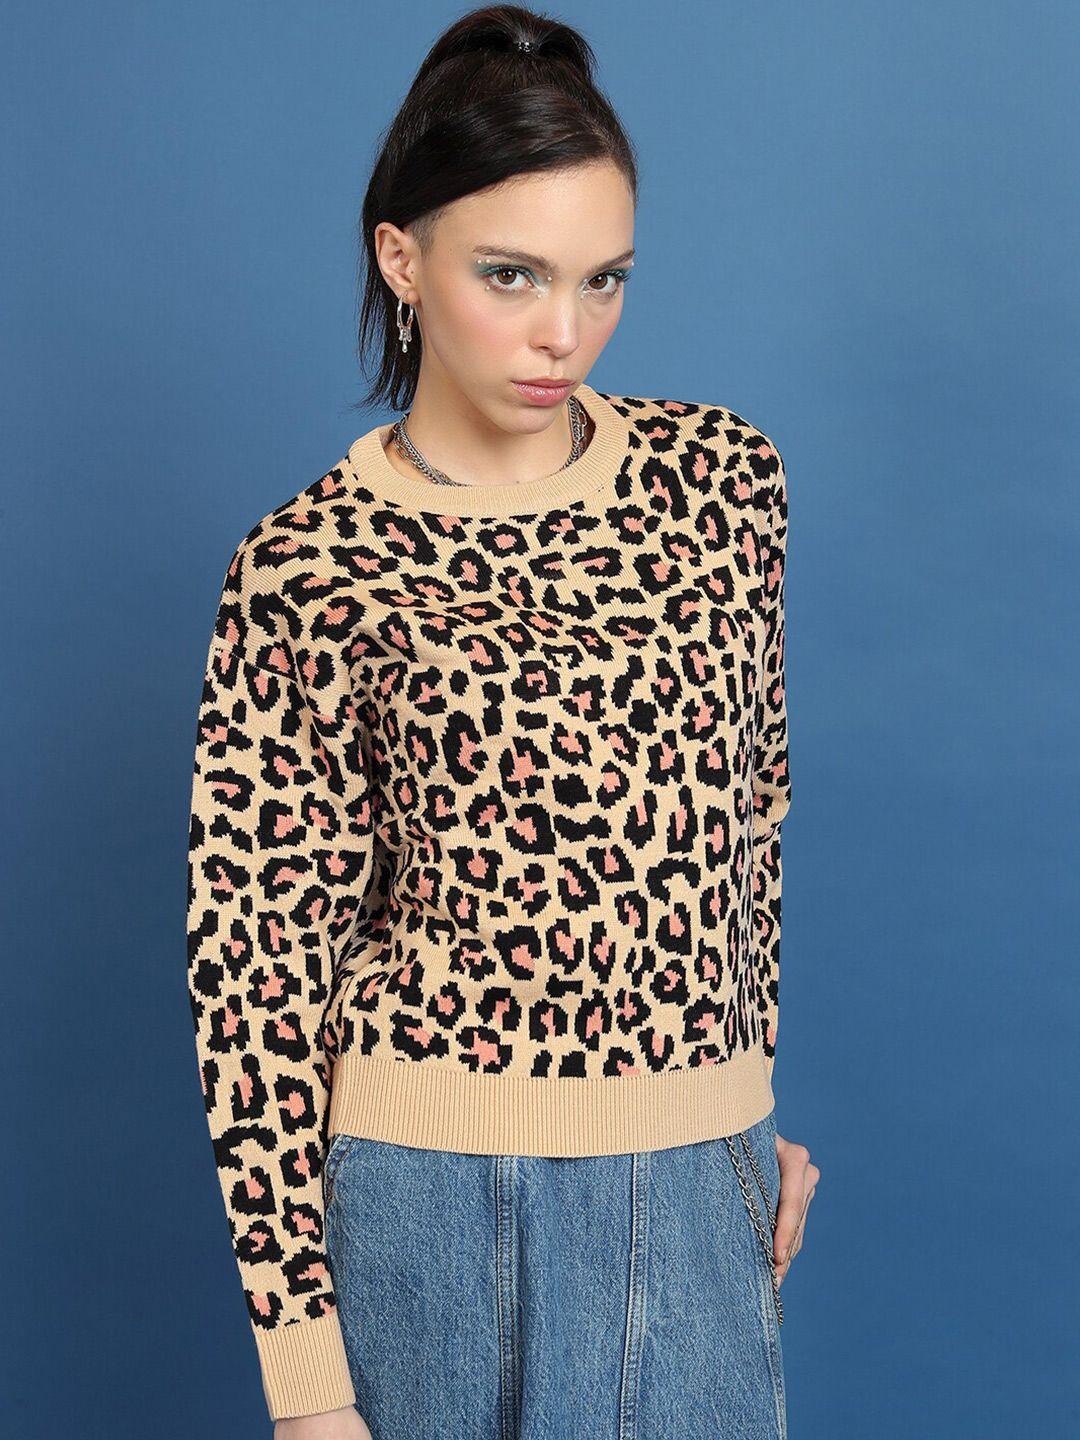 tokyo-talkies-animal-printed-jacquard-relaxed-fit-acrylic-pullover-sweater